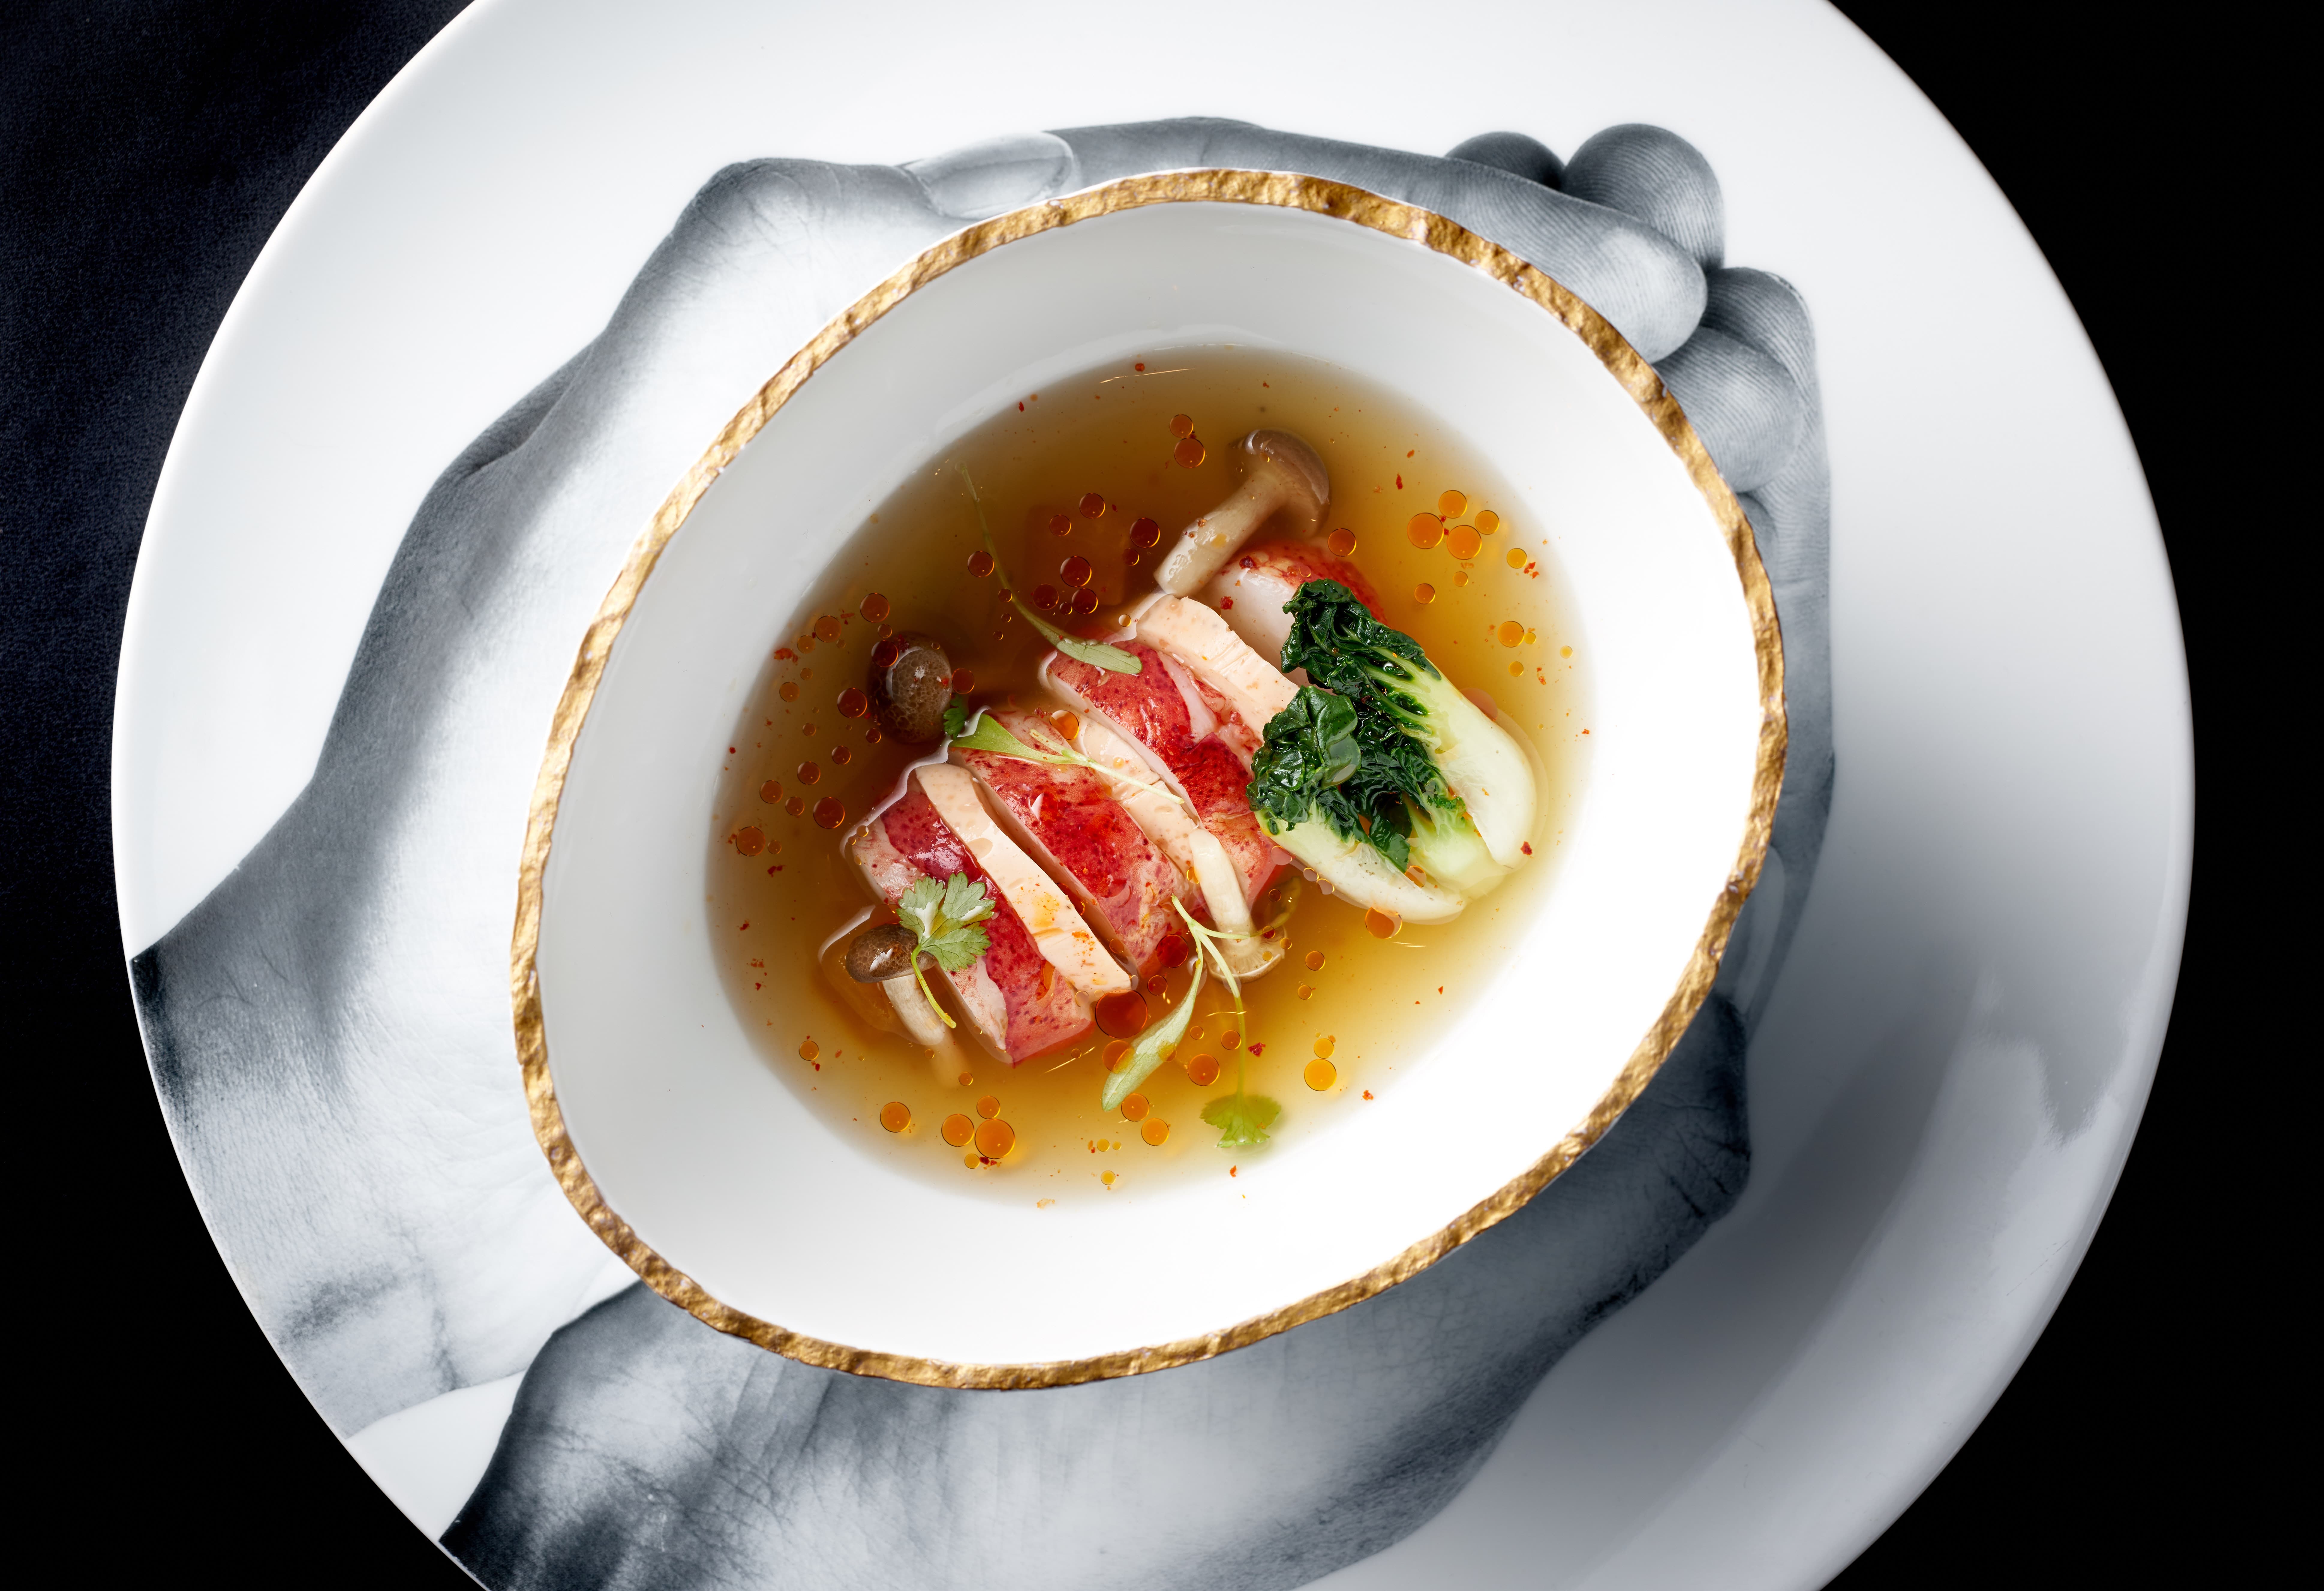 L_ATELIER_LE_HOMARD_Poached_Maine_Lobster,_anise_hyssop_broth,_summer_vegetables_(Credit_L_Atelier).jpg